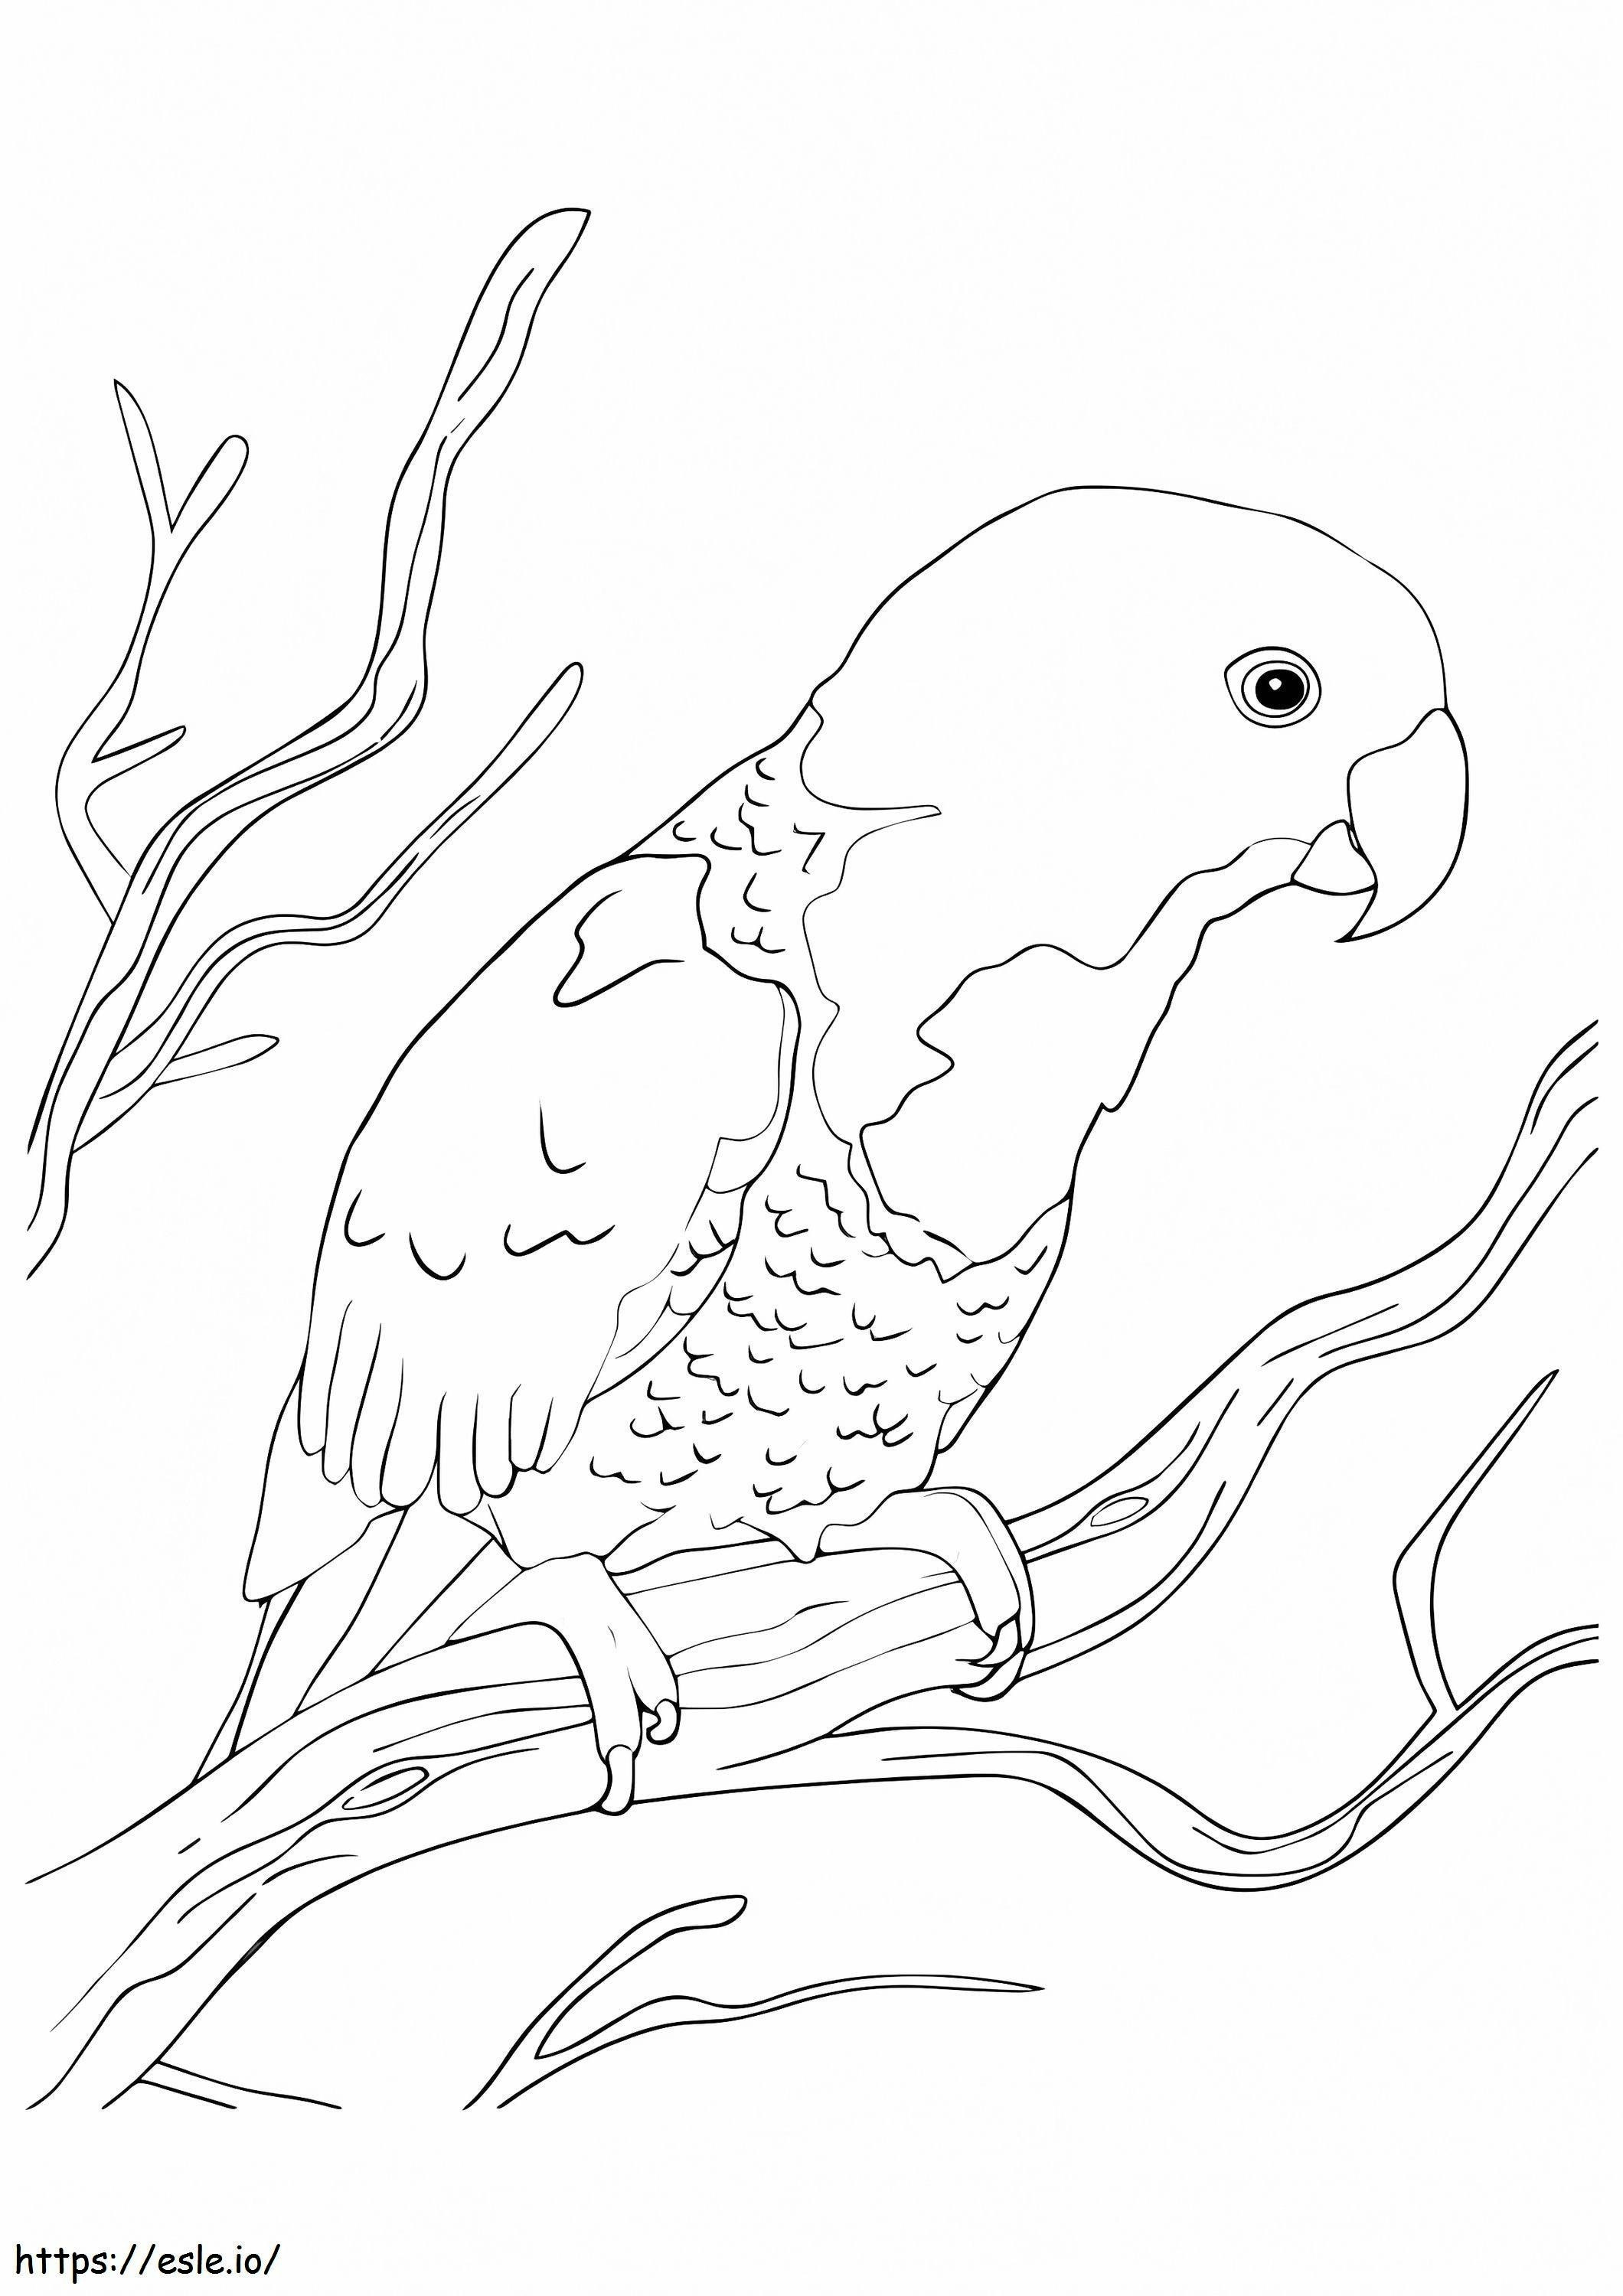 The Blue Naped Parrot coloring page